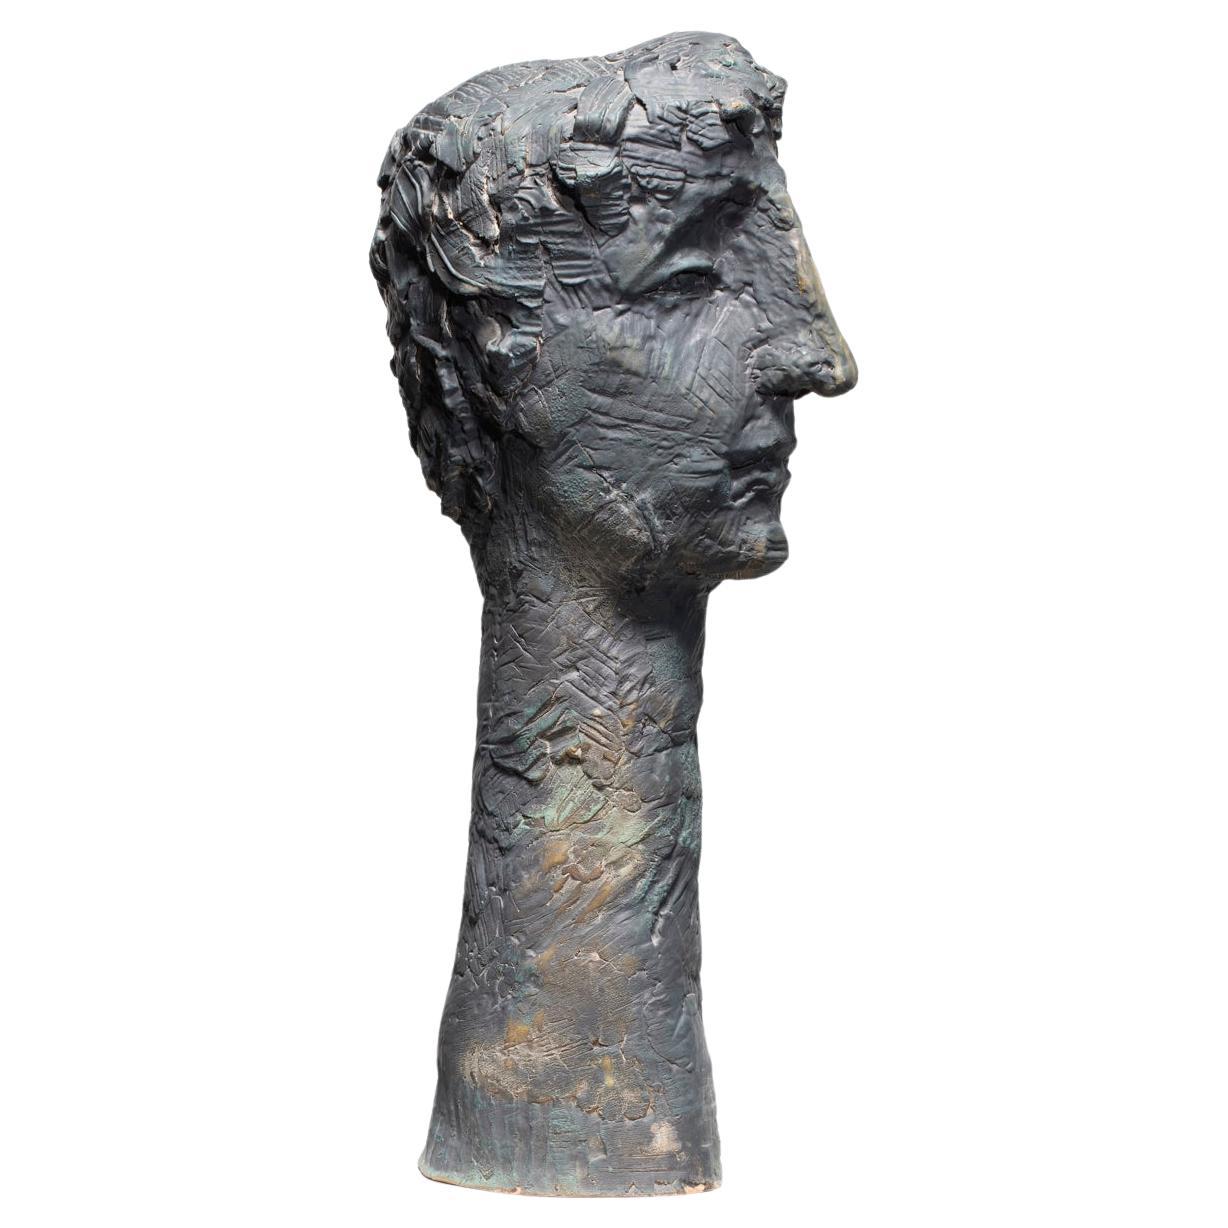 The UNTITLED portrait sculpture has a quiet yet powerful and commanding aura. The viewer cannot be around or near it without feeling its presence. It has a very classical approach in the large straight bridge of the nose and the head of curly hair